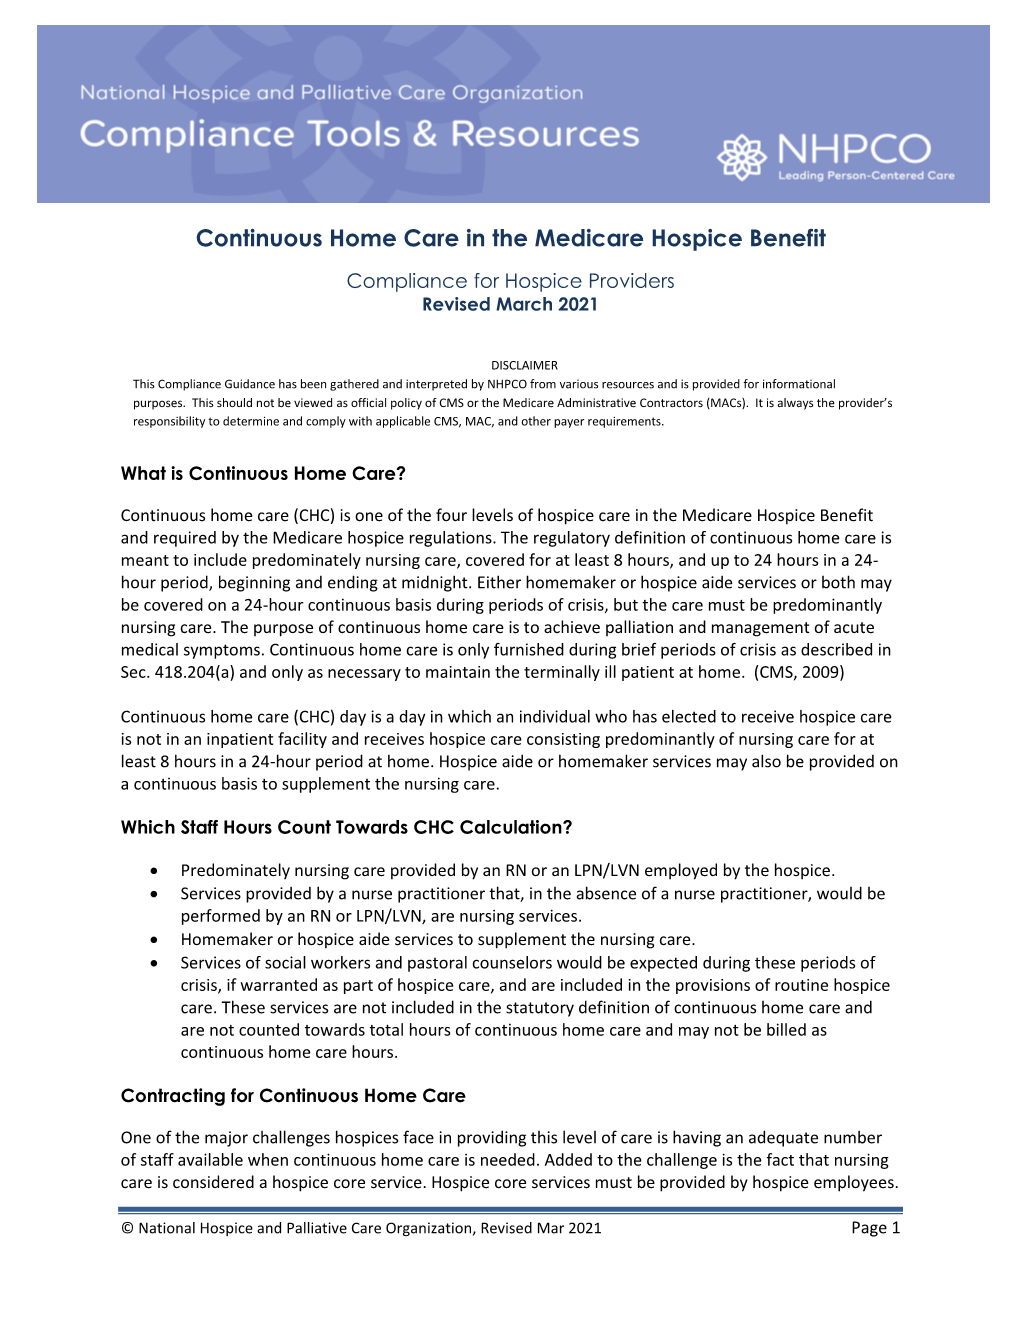 Continuous Home Care in the Medicare Hospice Benefit